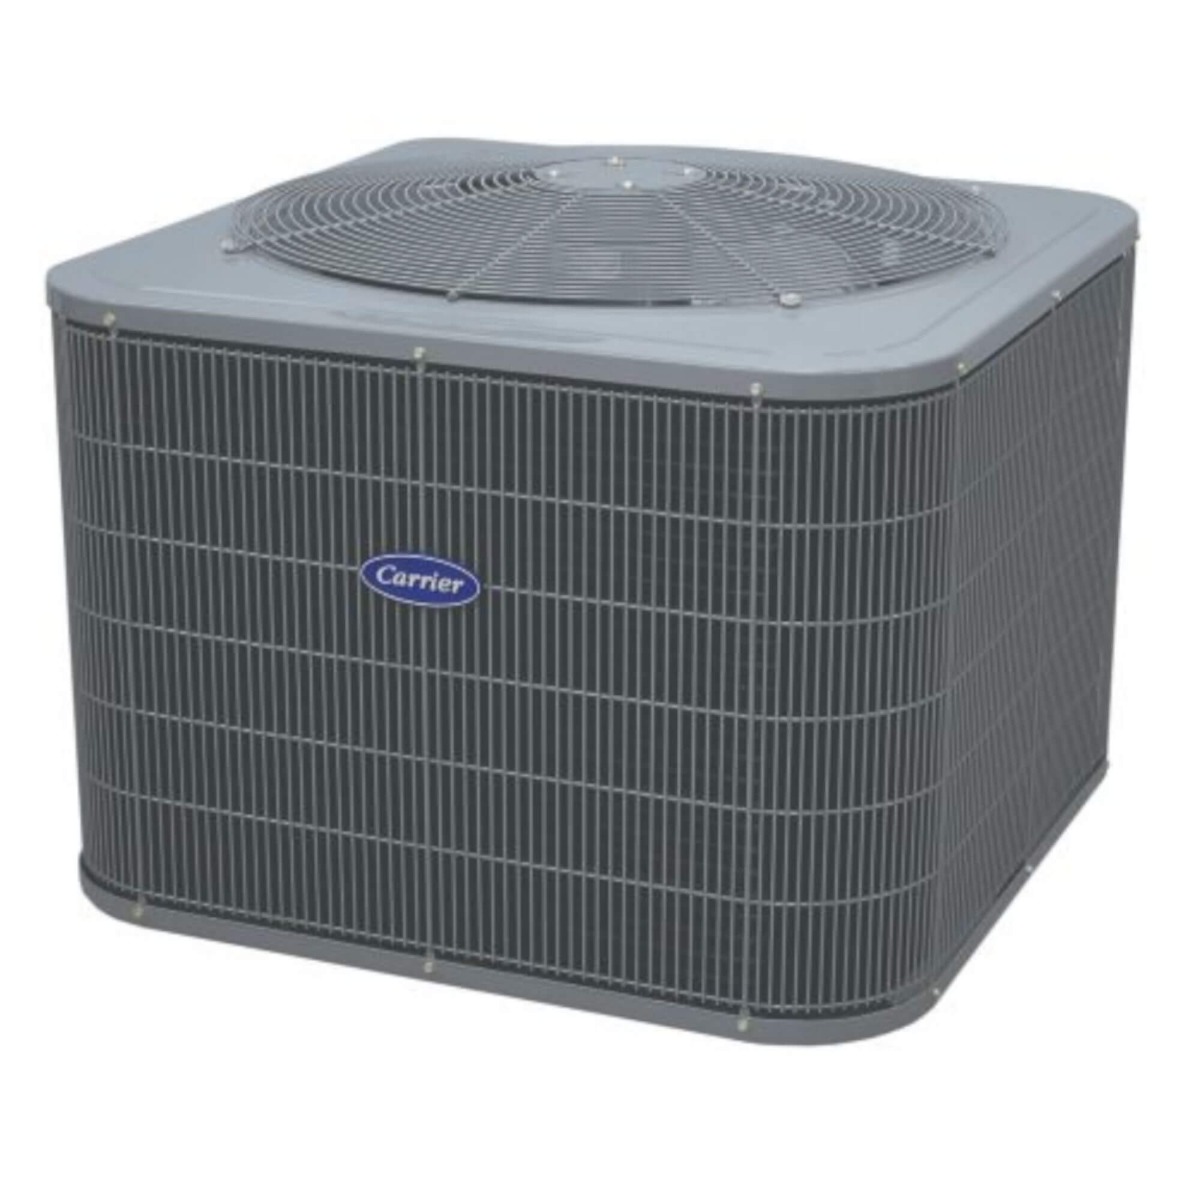 Carrier Comfort 3.5 Ton Up to 15 SEER2 Residential Condensing